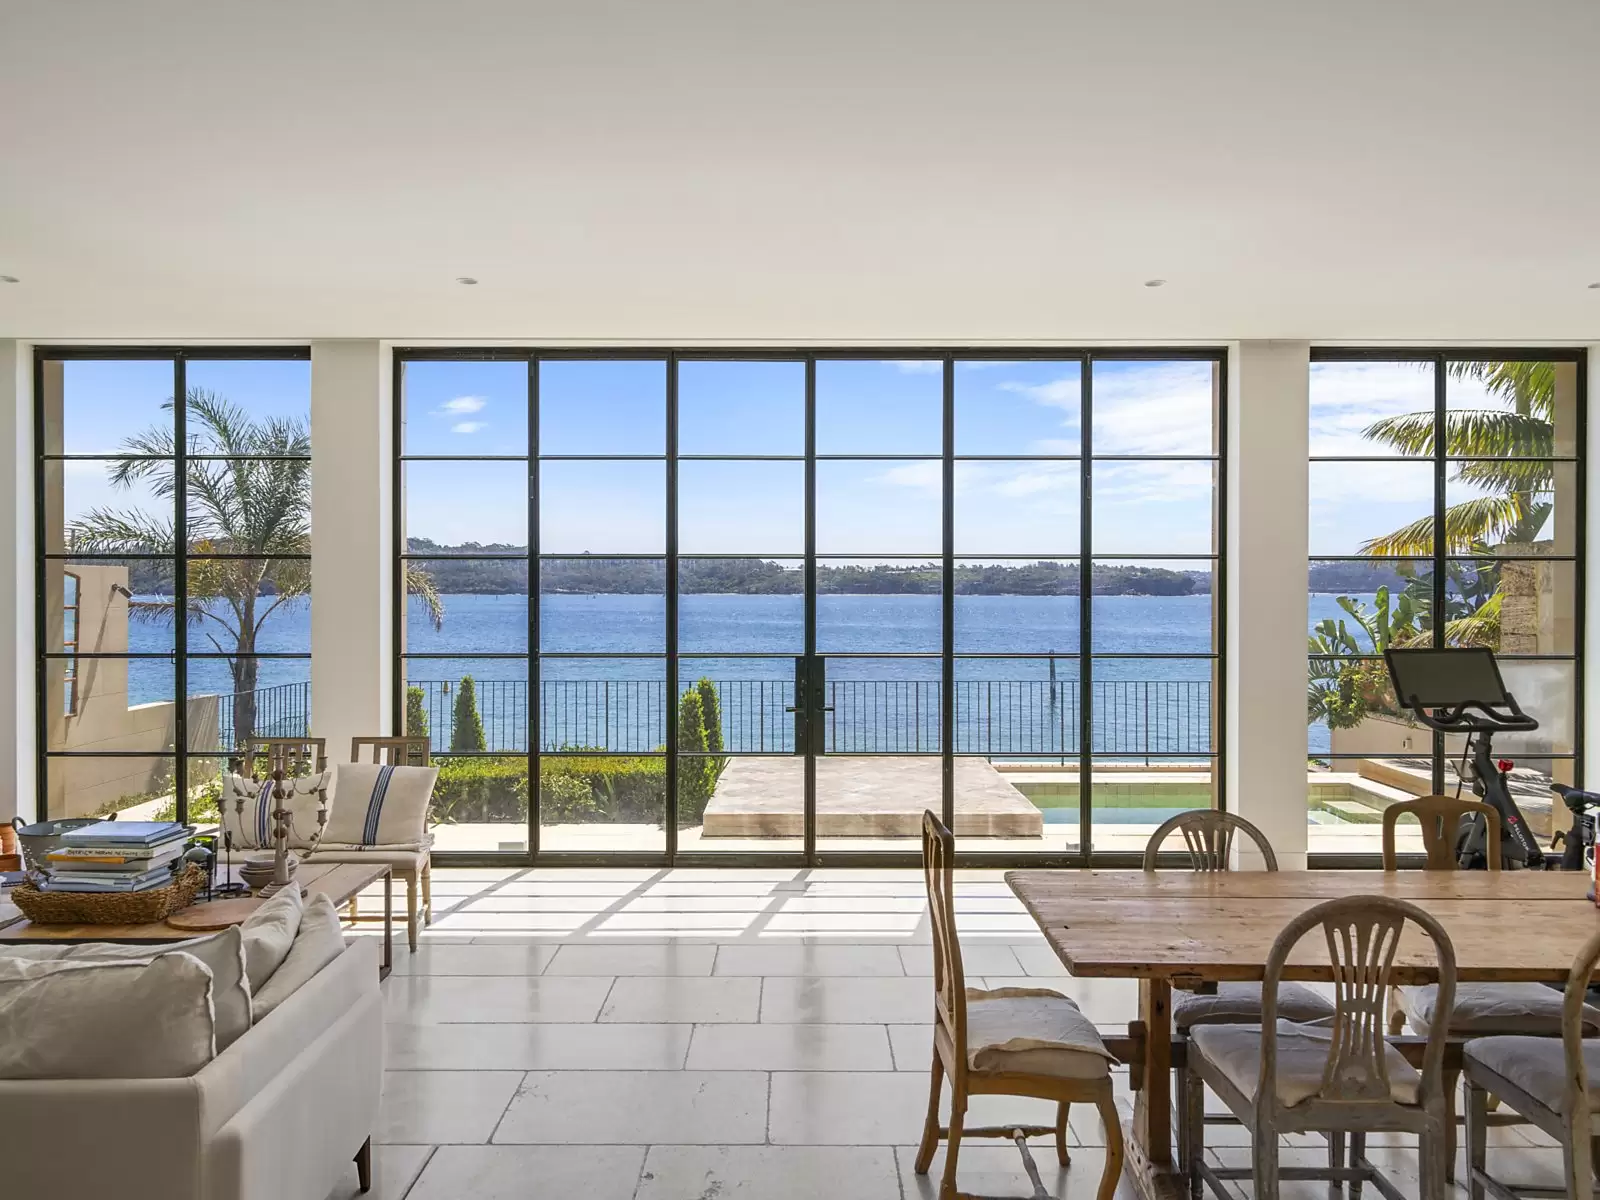 Photo #7: 13 Victoria Street, Watsons Bay - Sold by Sydney Sotheby's International Realty